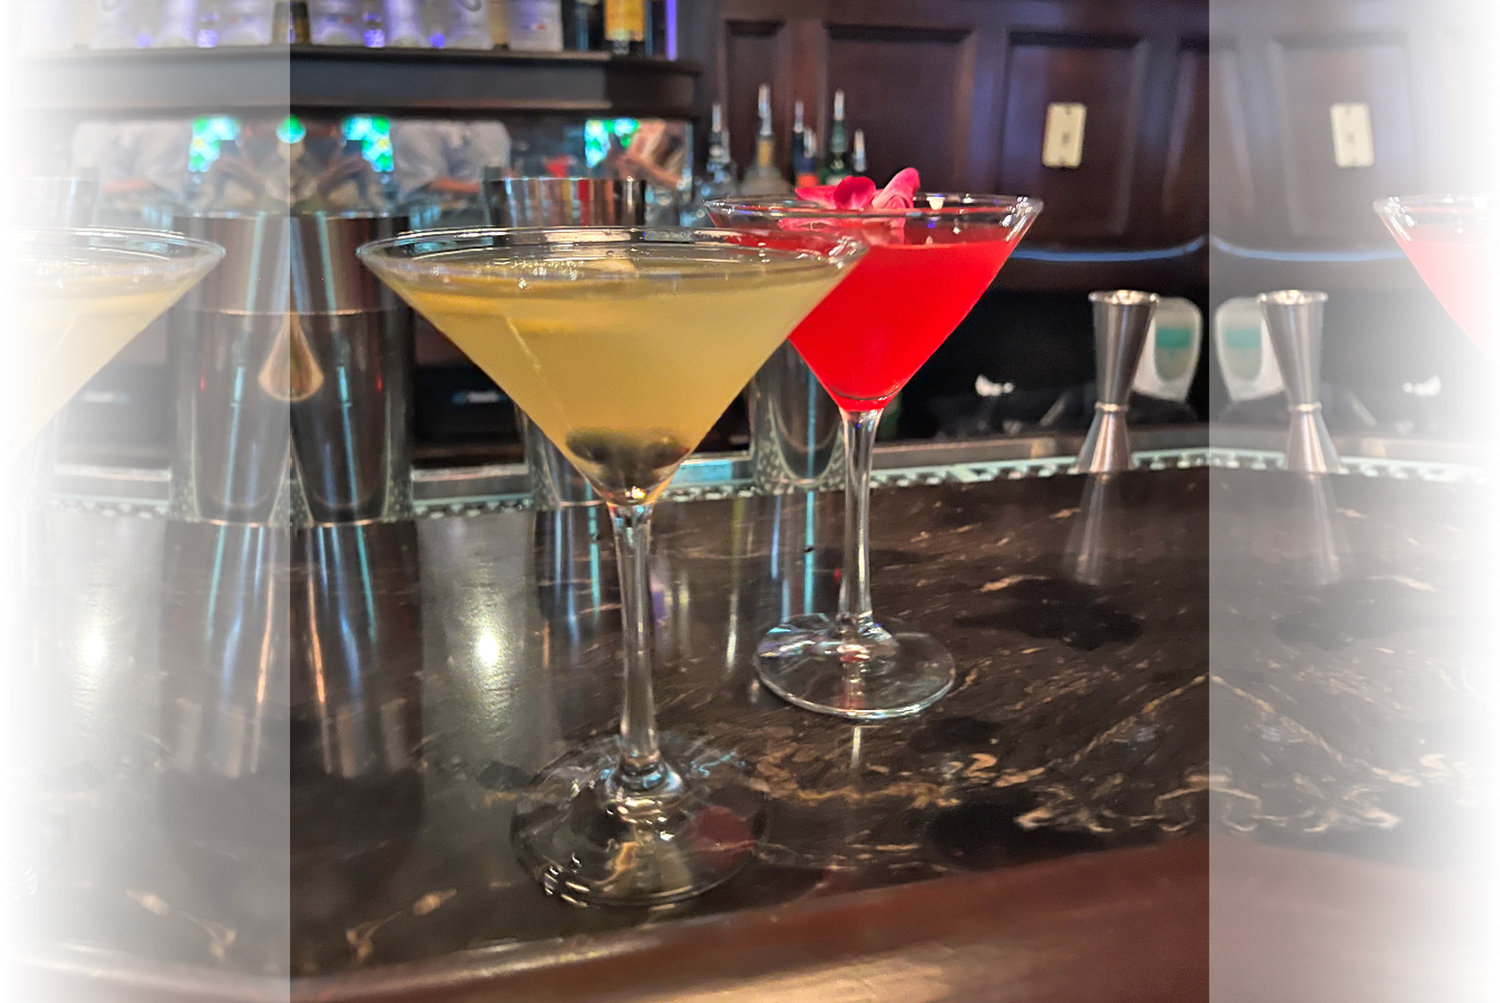 The Amelia Earhart and Paul Revere Red cocktails